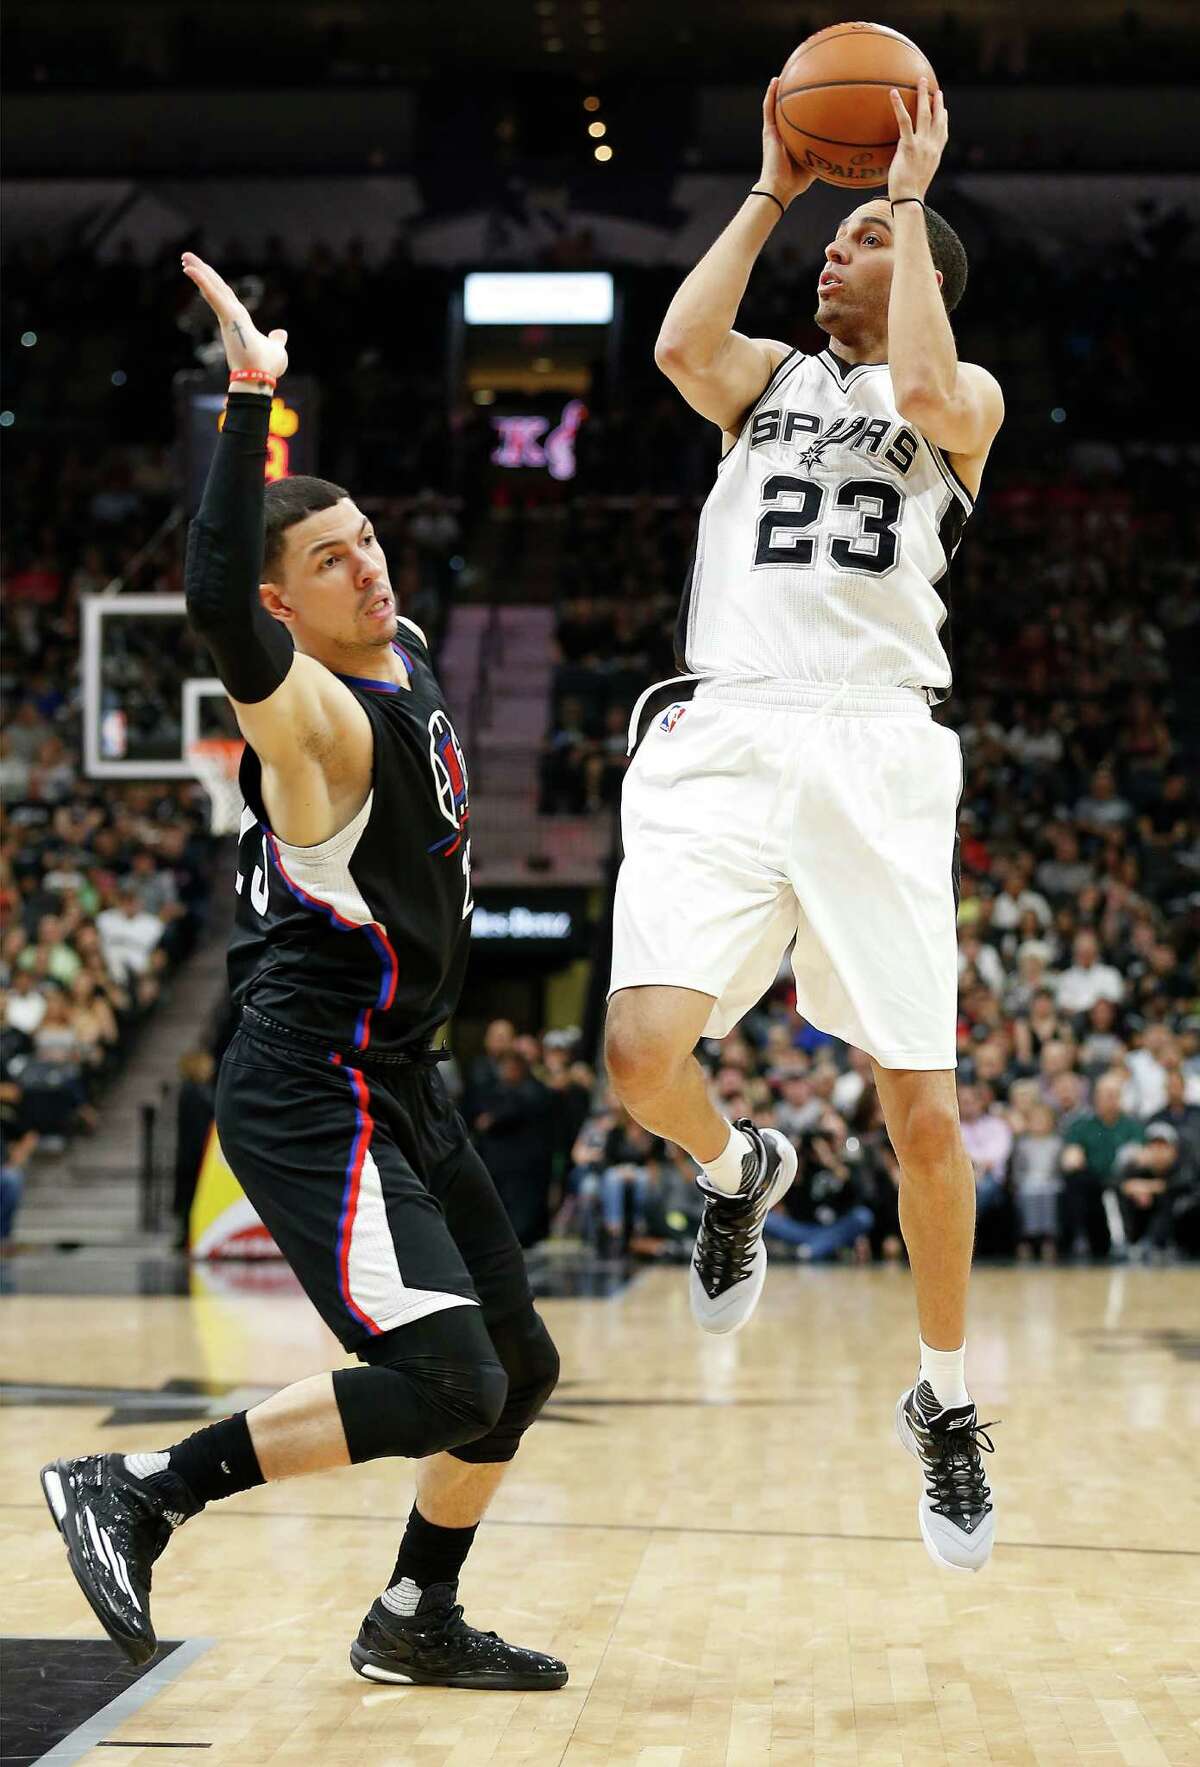 Spurs’ Kevin Martin gets fouled as he shoots against Los Angeles Clippers’ Austin Rivers at the AT&T Center on March 15, 2016.